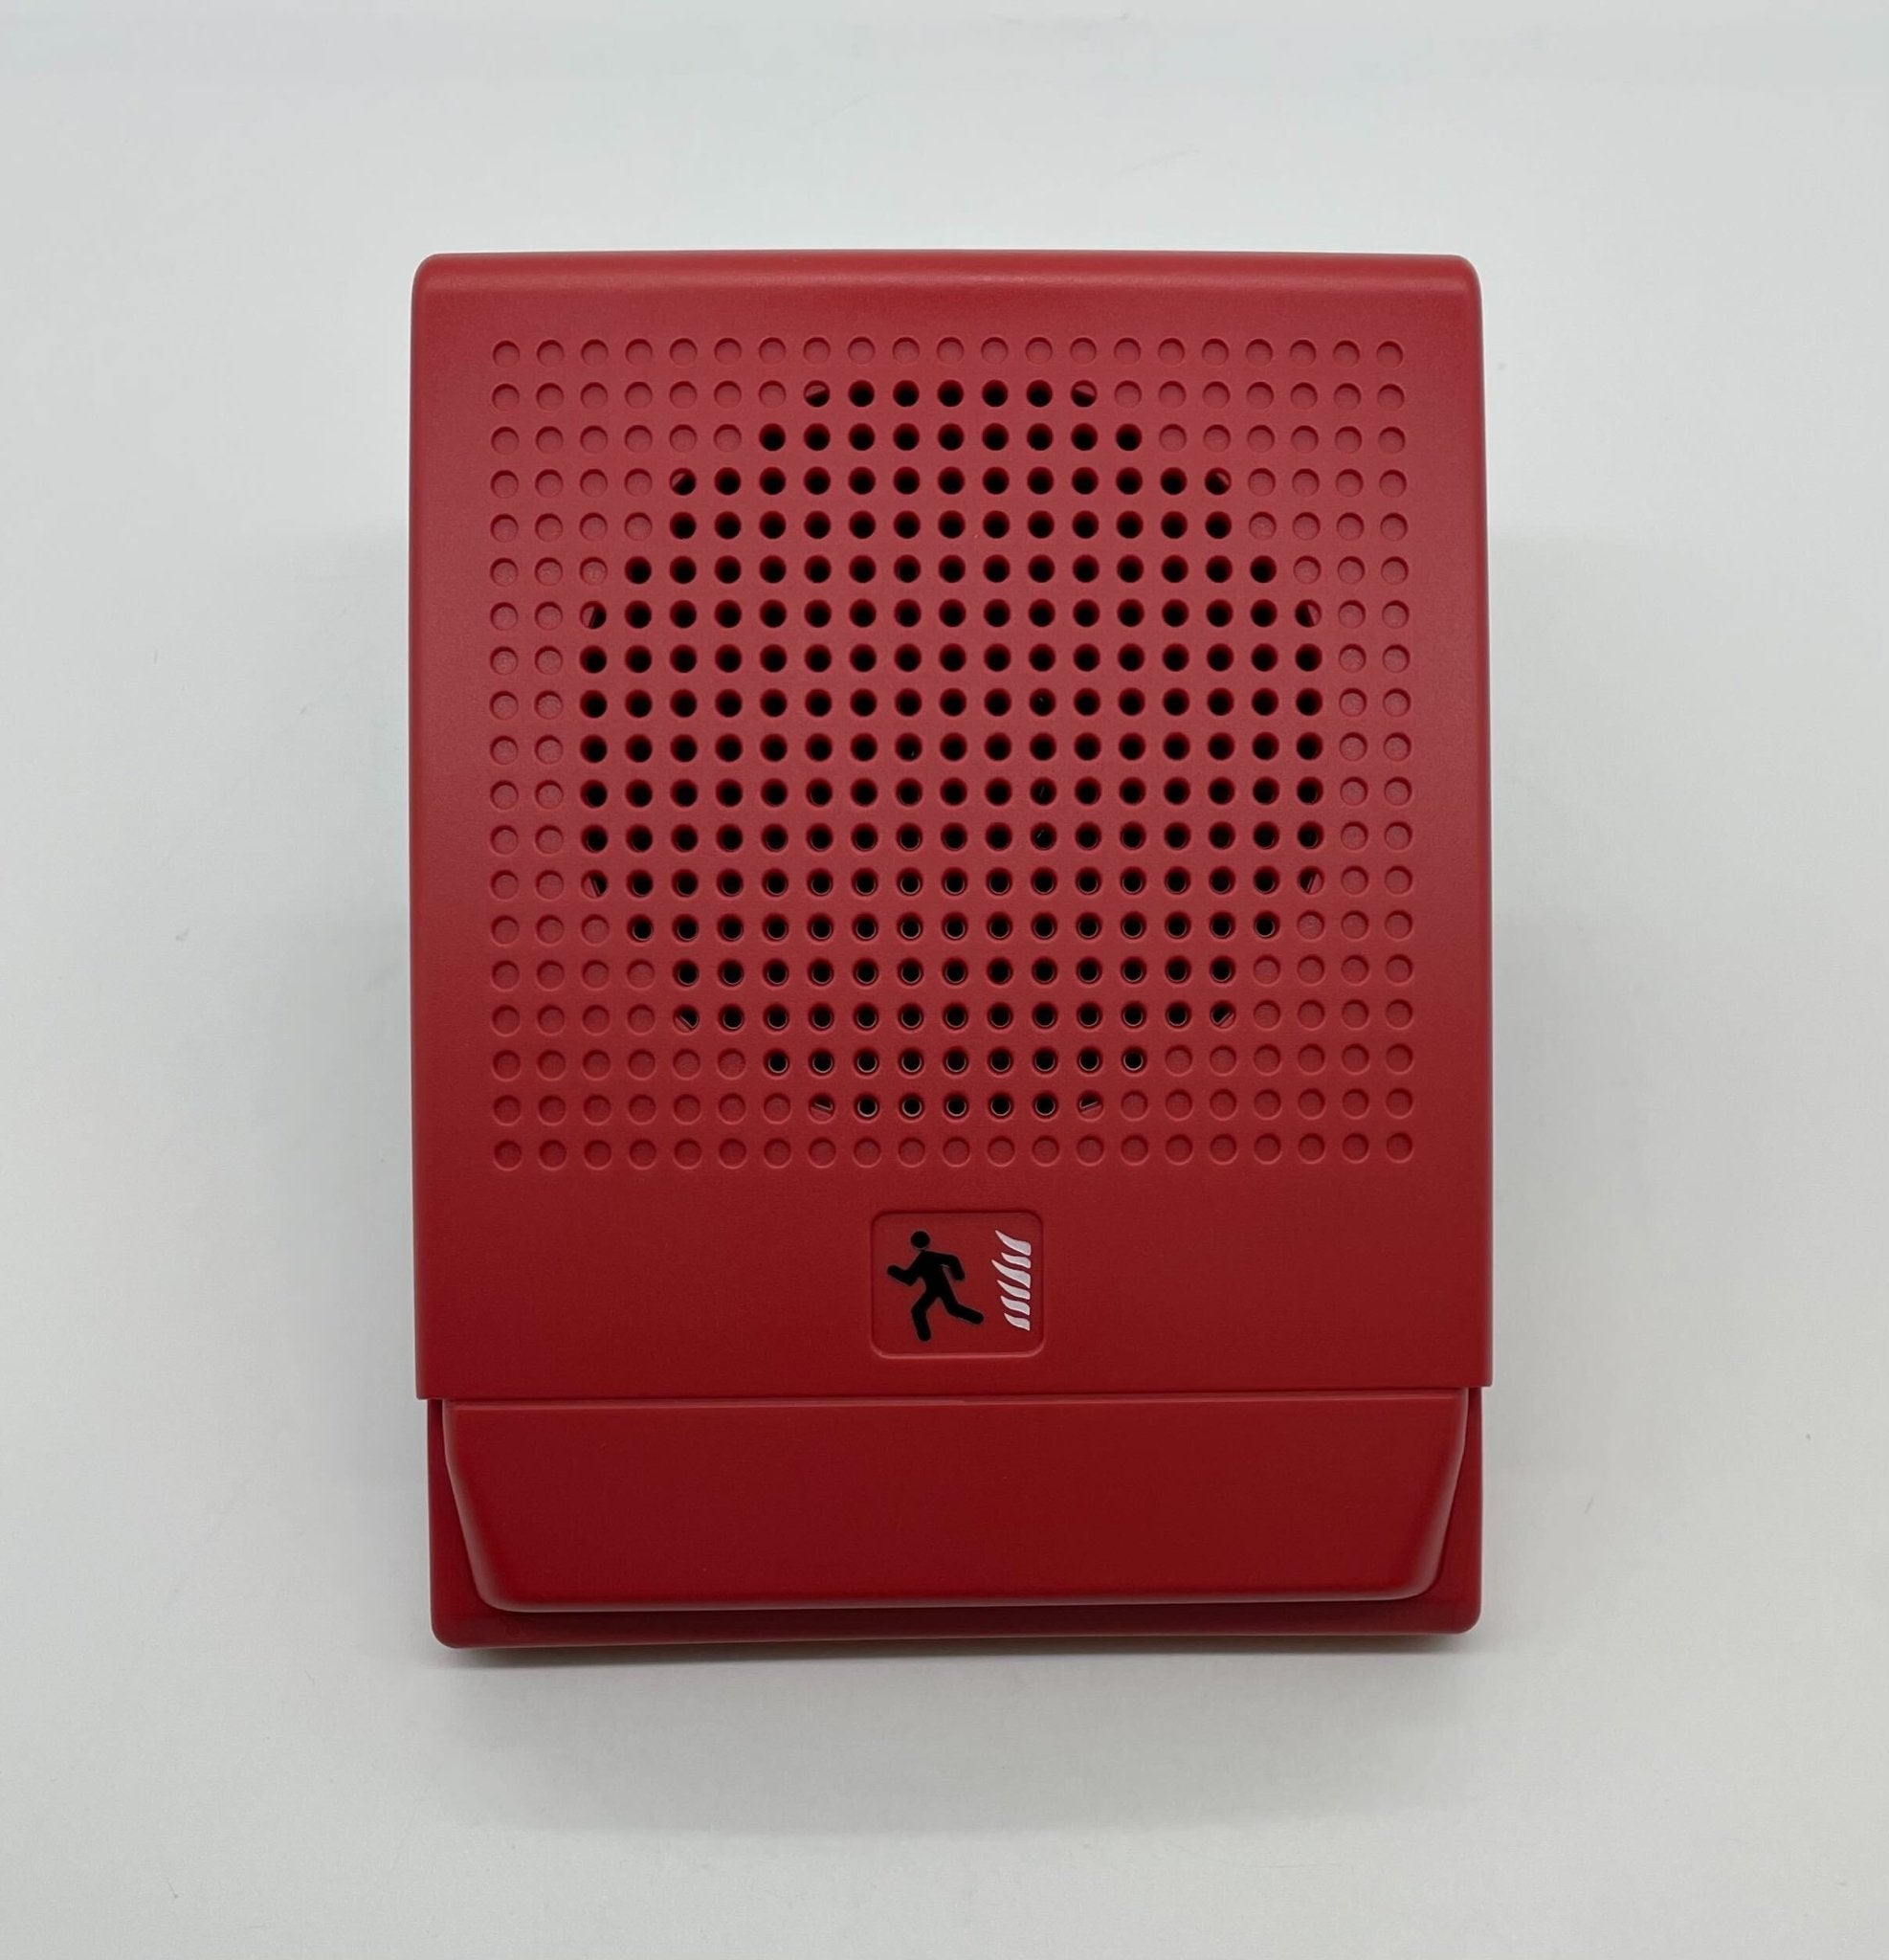 Edwards G4HFRF-S2 - The Fire Alarm Supplier